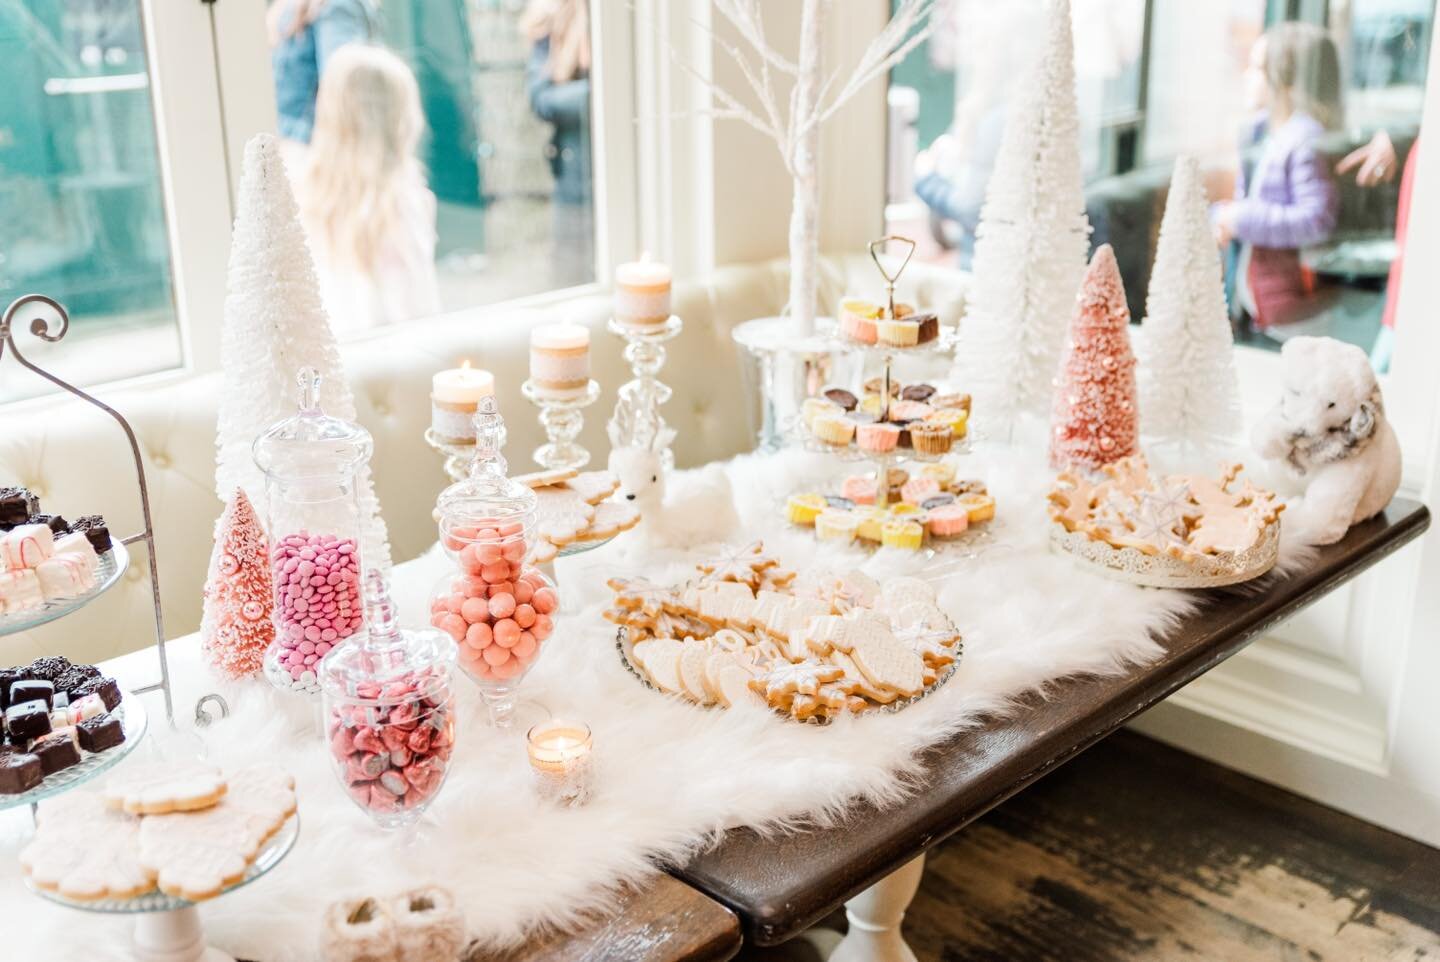 The prettiest dessert table there ever was for Tara&rsquo;s winter baby shower 💕❄️